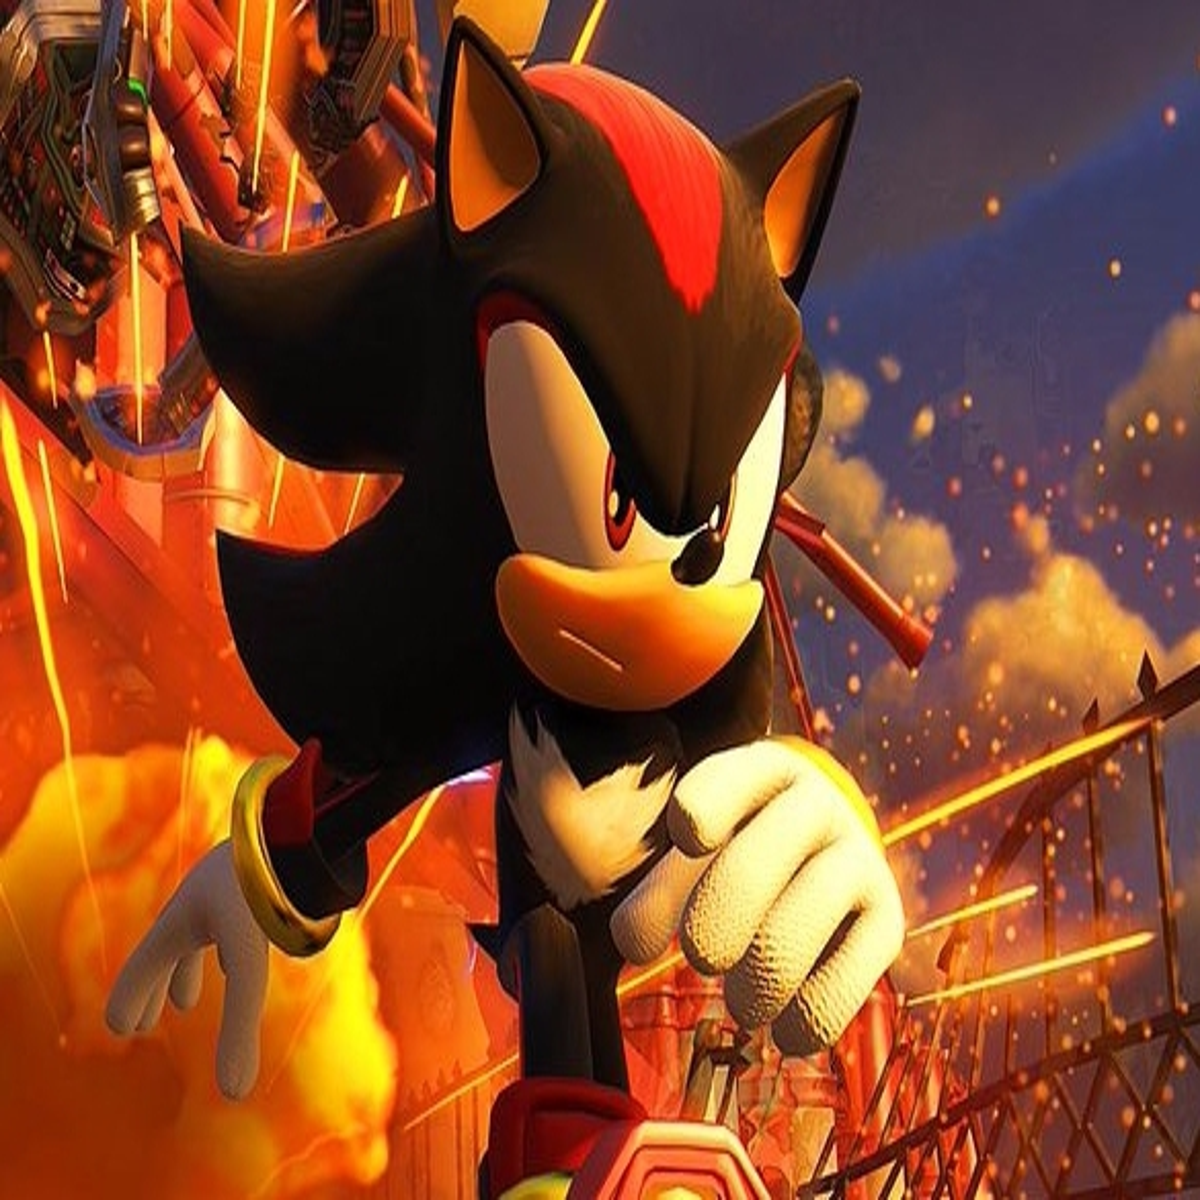 Shadow Sonic PNG Image File - PNG All